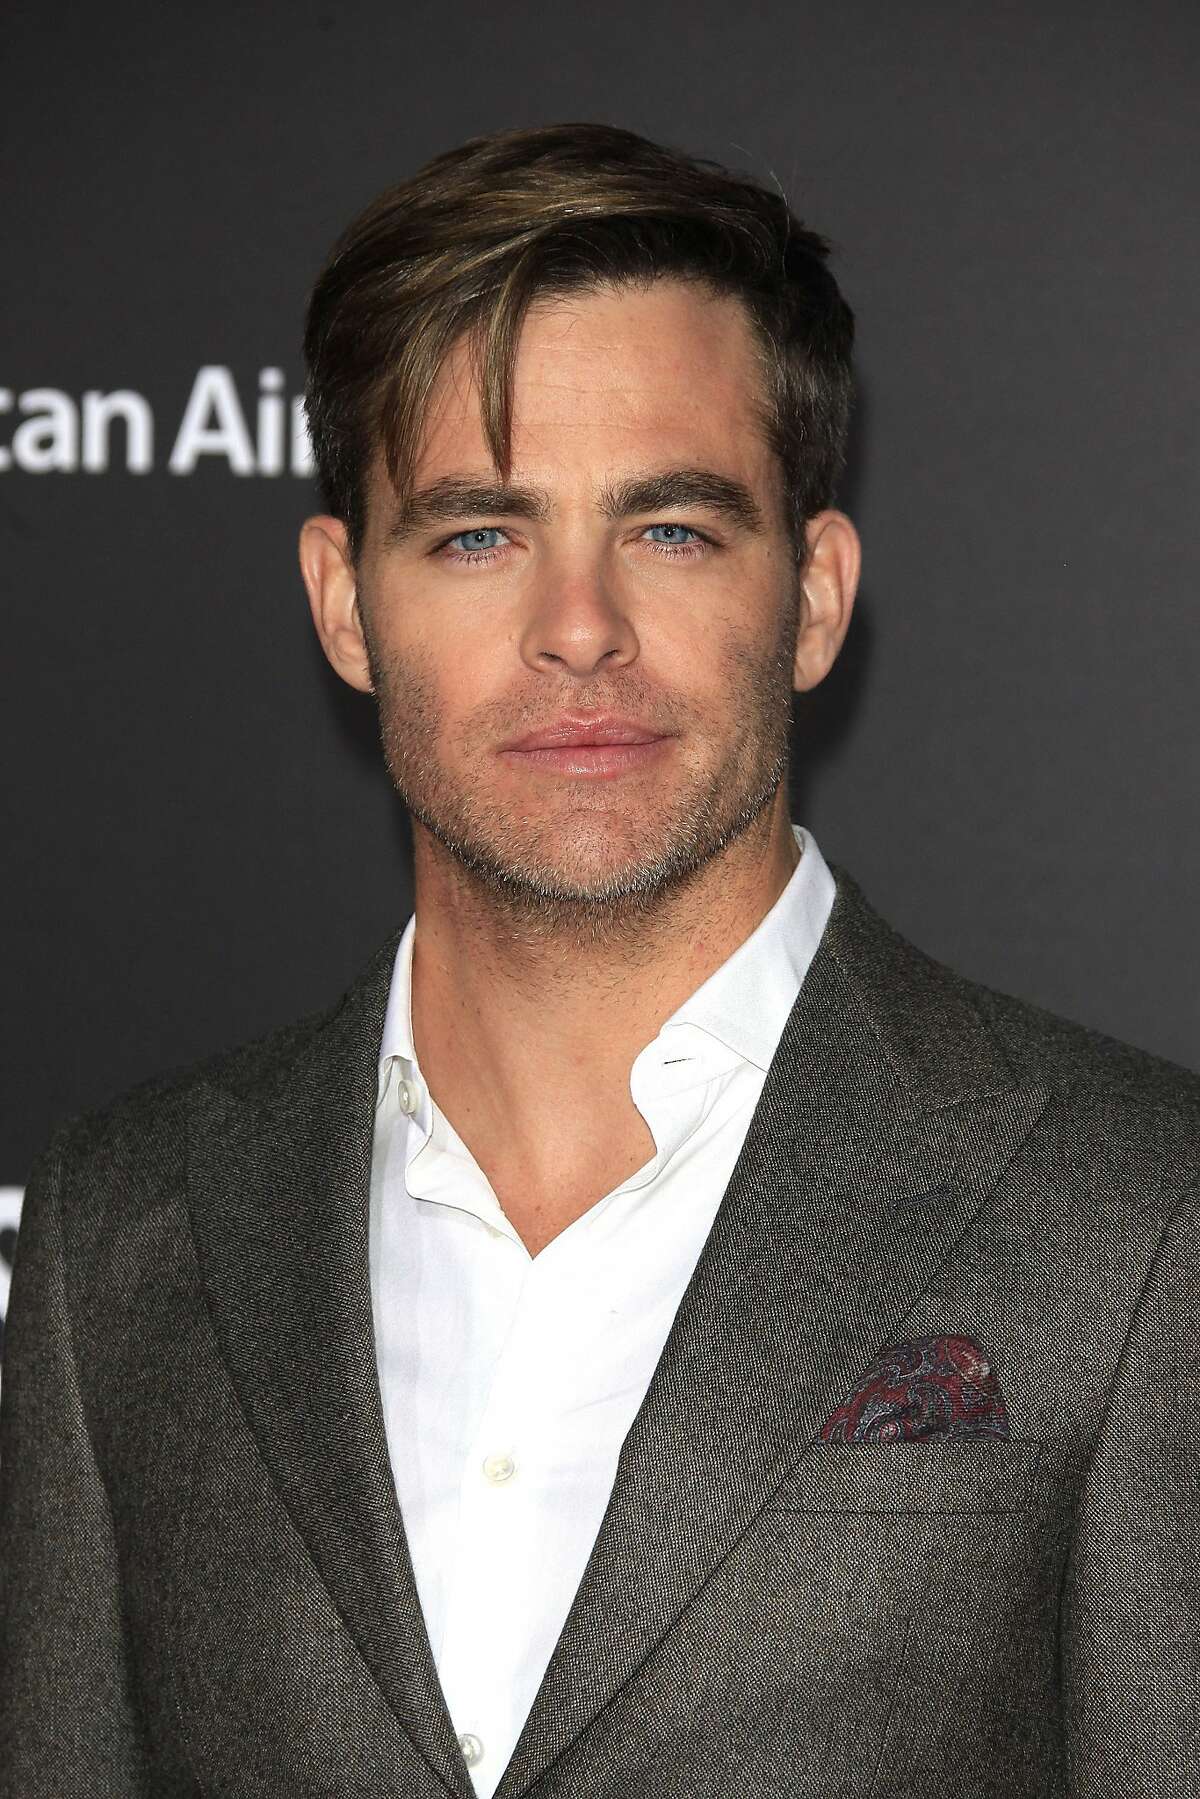 Chris Pine attends the premiere of "The Finest Hours" at TCL Chinese Theatre IMAX in Hollywood on Jan. 25, 2016. (Nina Prommer/Patrick McMullan Co./Sipa USA/TNS)